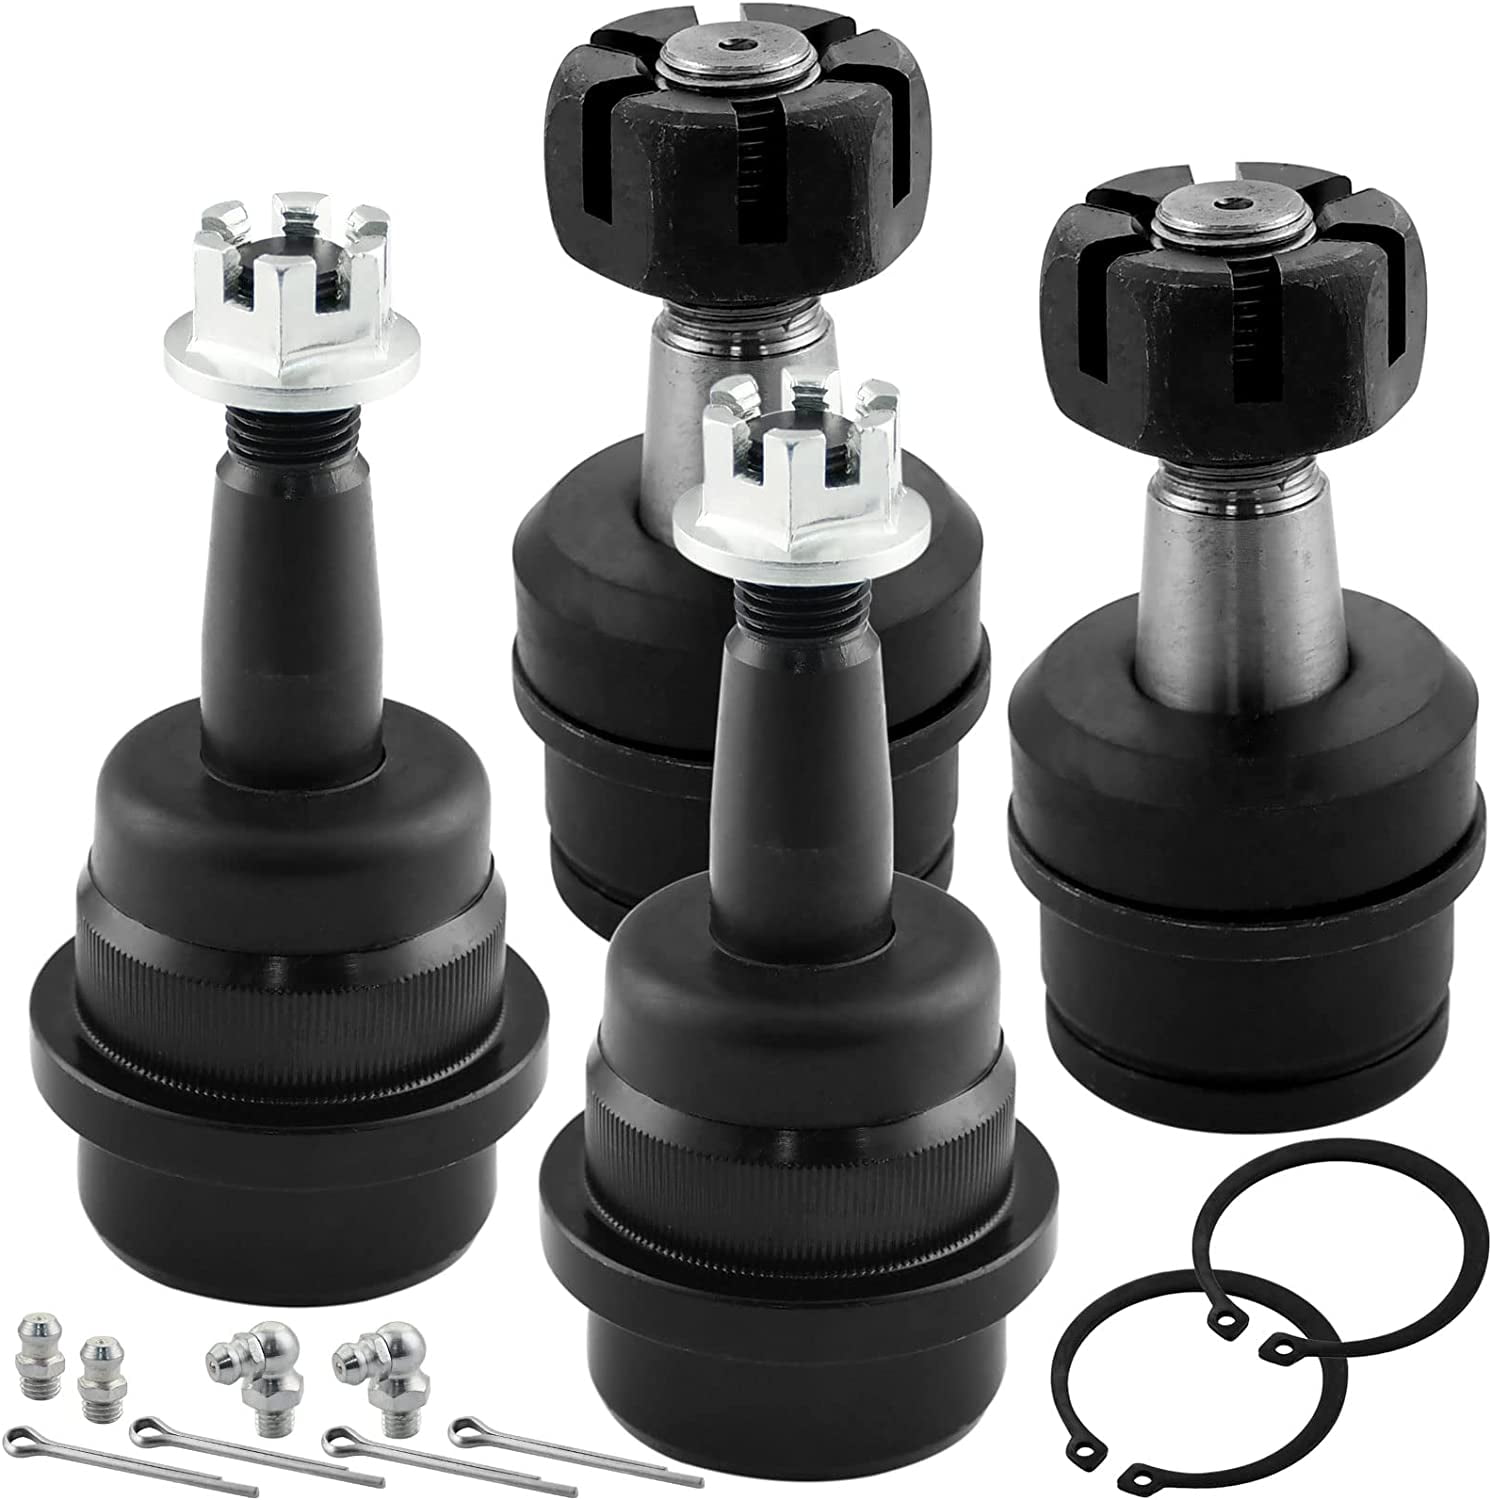 4PK Front Upper  Lower Ball Joints Assembly Fits for Jeep Grand Cherokee  1999-2004, Jeep Wrangler 2007-2017, Jeep Wrangler JK 2018 Suspension Tie  Rod Ball Joint-All Models